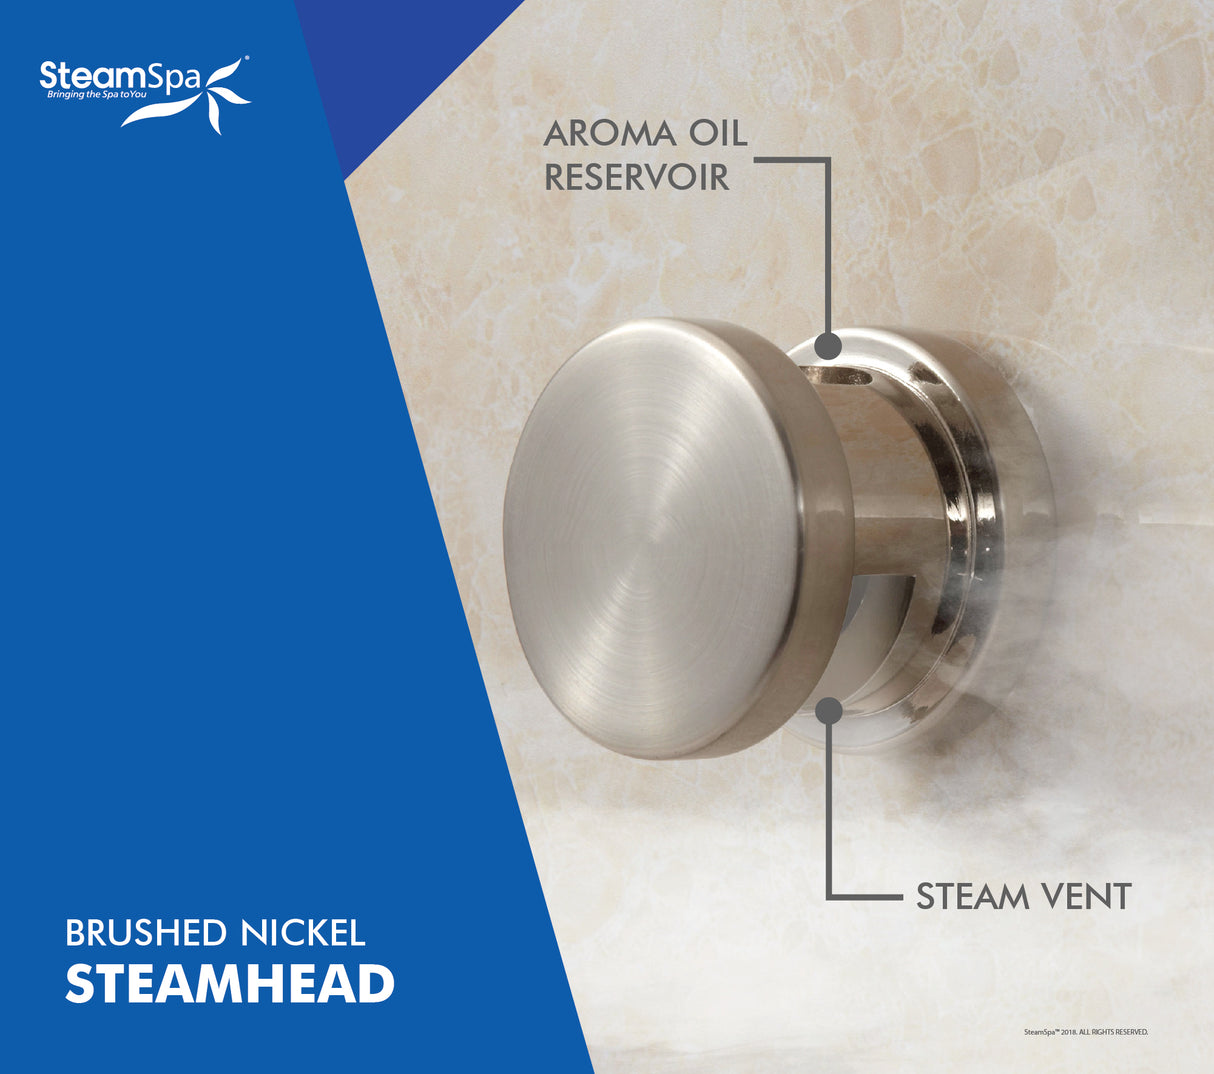 SteamSpa Royal 7.5 KW QuickStart Acu-Steam Bath Generator Package with Built-in Auto Drain in Brushed Nickel RYT750BN-A